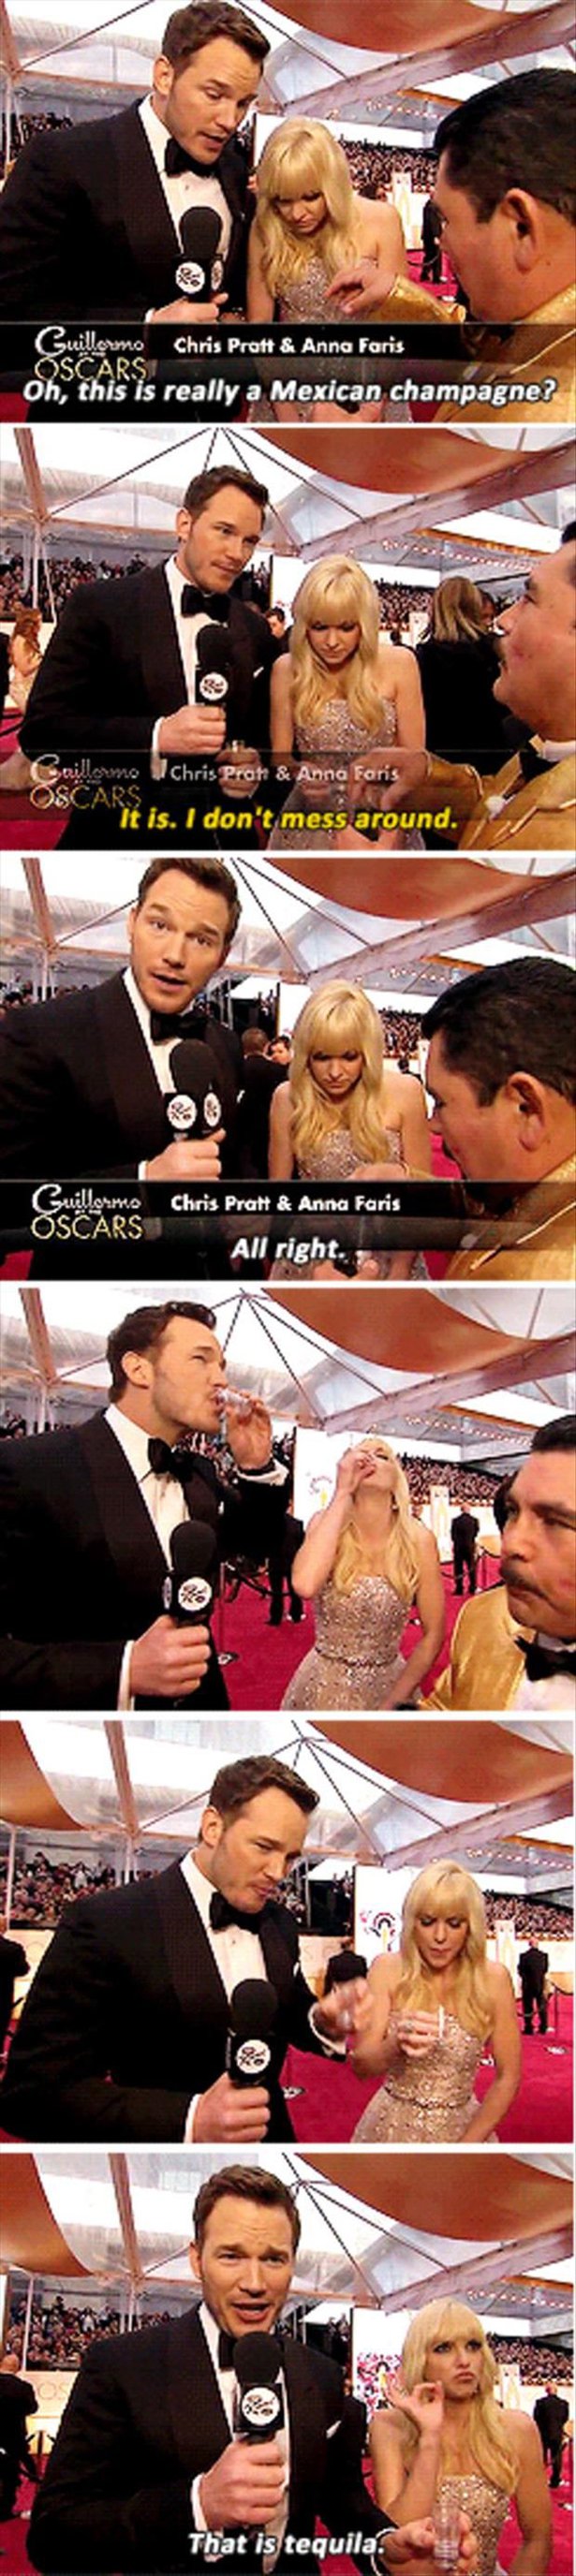 Anna Faris - loro Chris Pratt & Anna Faris Oscars Oh, this is really a Mexican champagne? Oscars Sailermo Chris Pratt & Anna Faris It is. I don't mess around. Guillermo Oscars Chris Pratt & Anna Faris All right. That is tequila